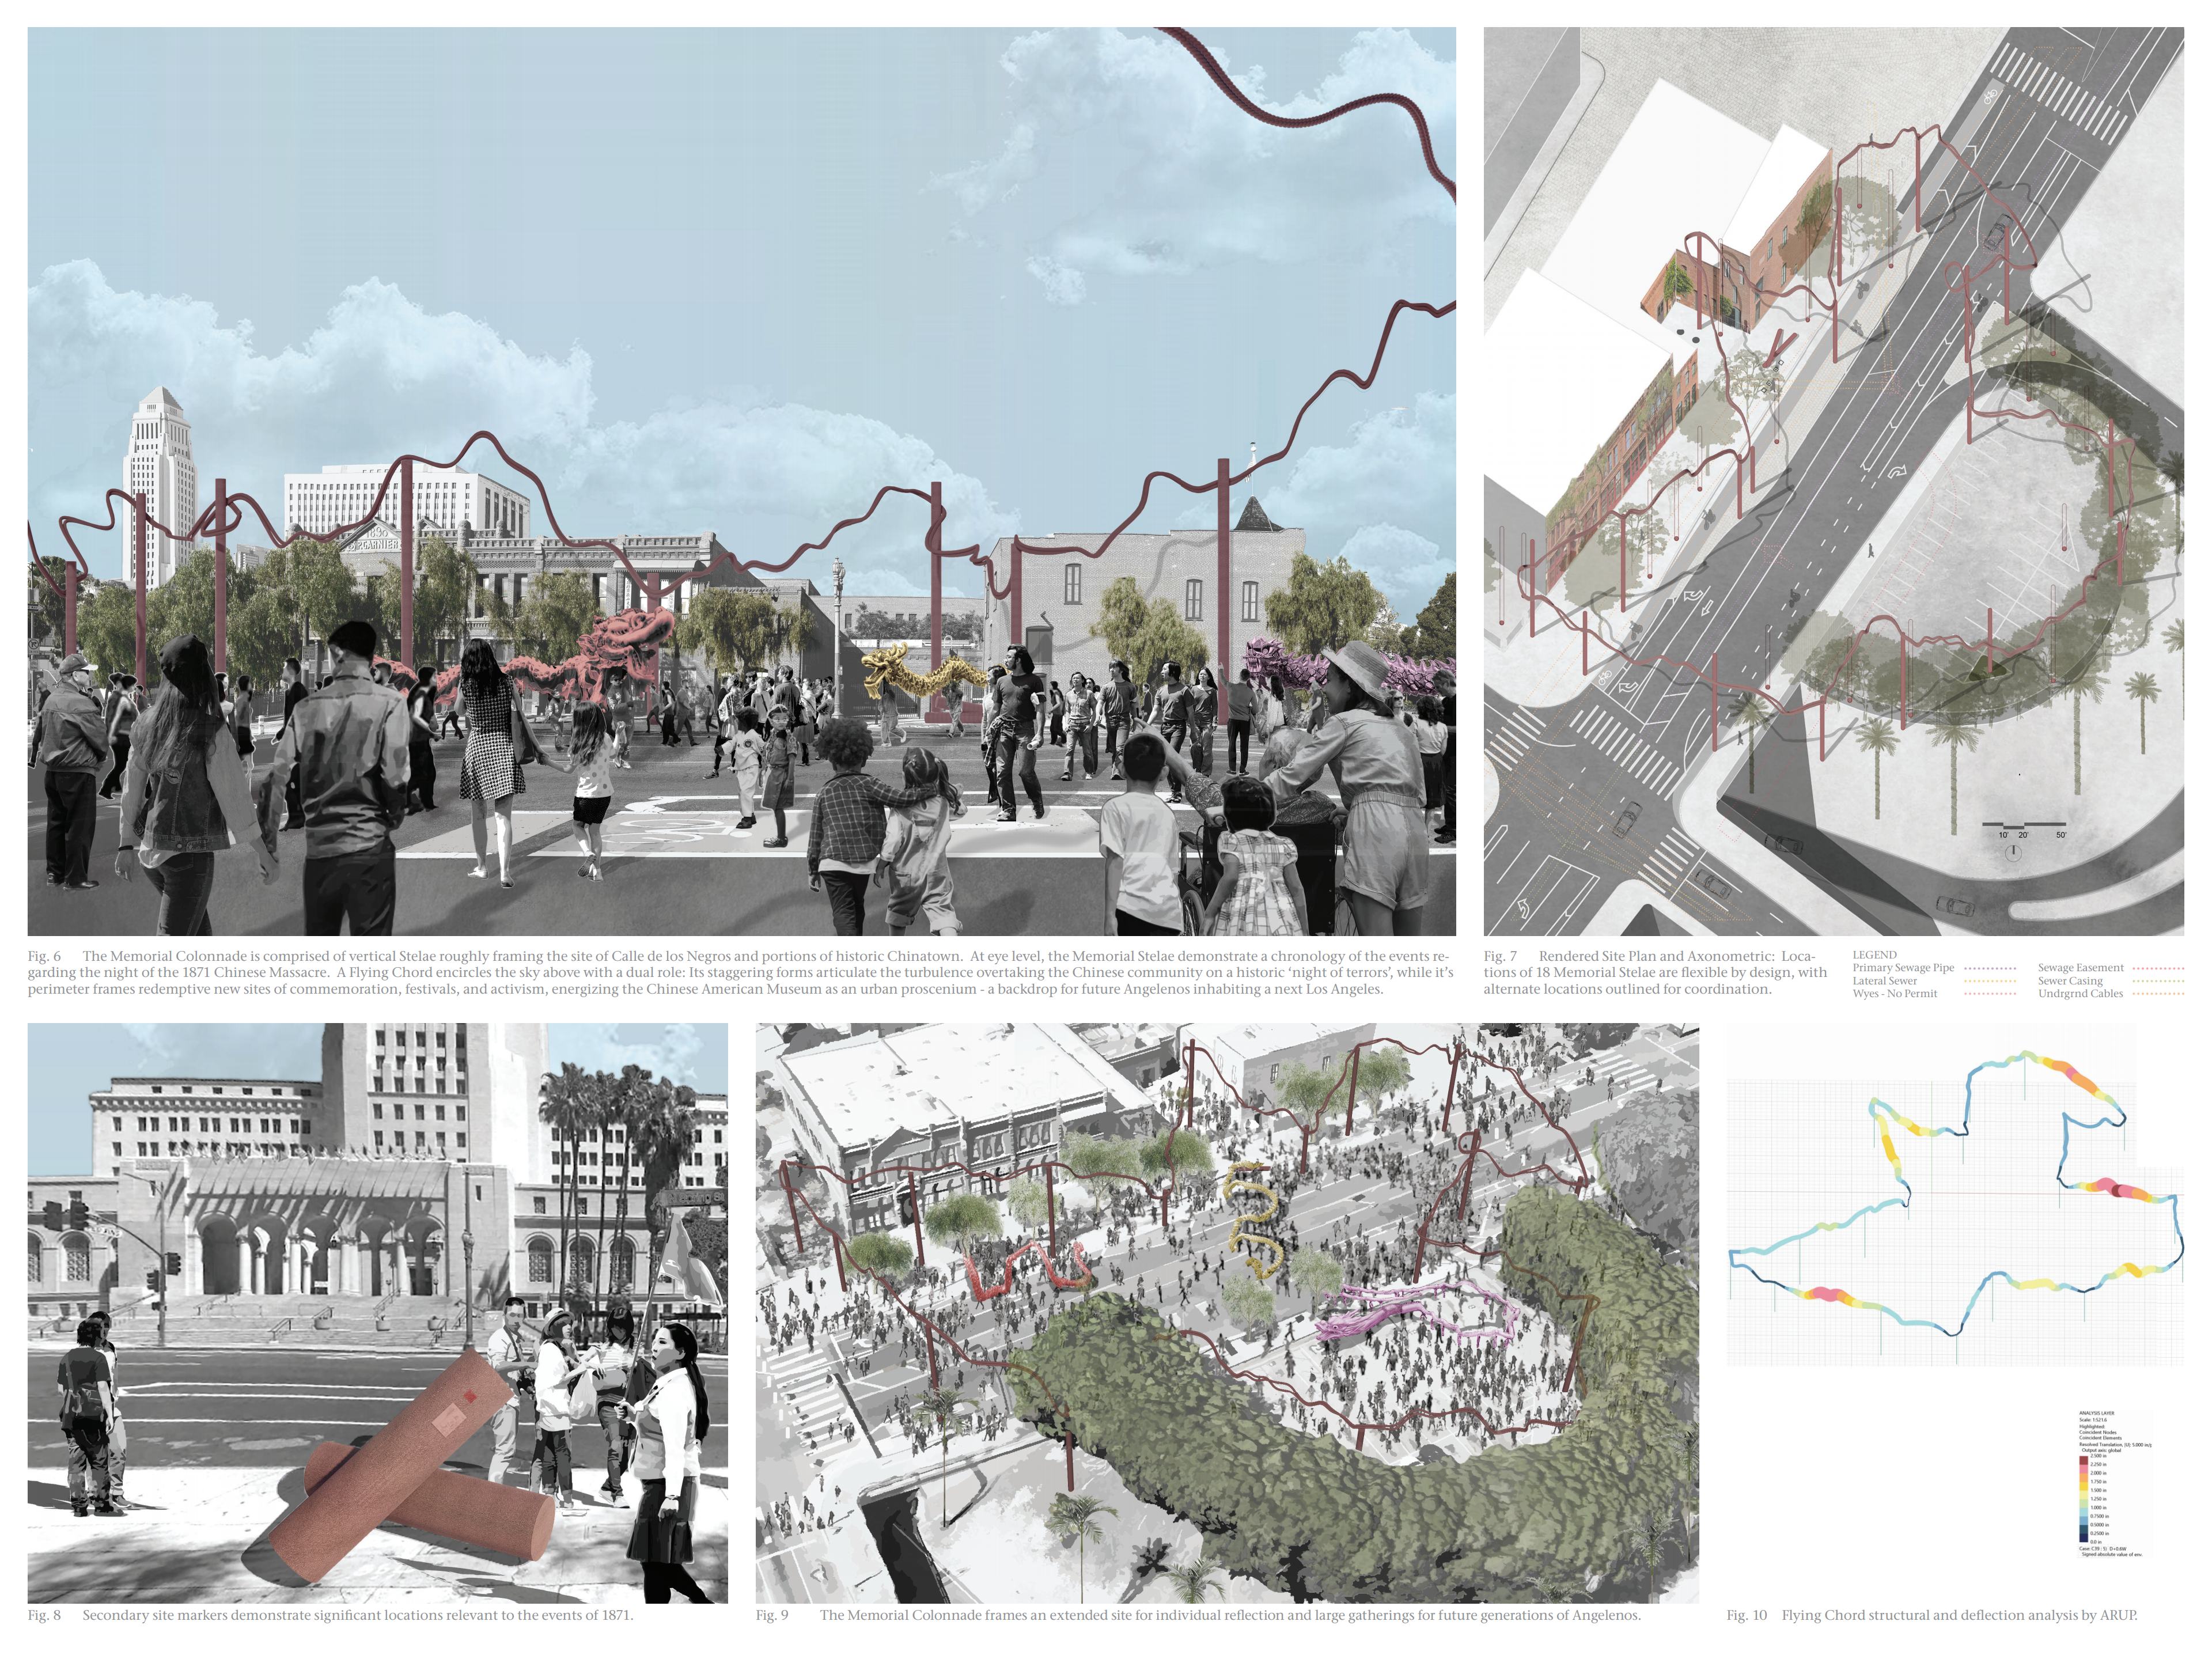 Proposed Concept of Memorial to the Victims of the 1871 Chinese Massacre. Artists Anna Sew Hoy and Zhu Jia and Formation Association. Artists/Architect Collaboration, Los Angeles, CA